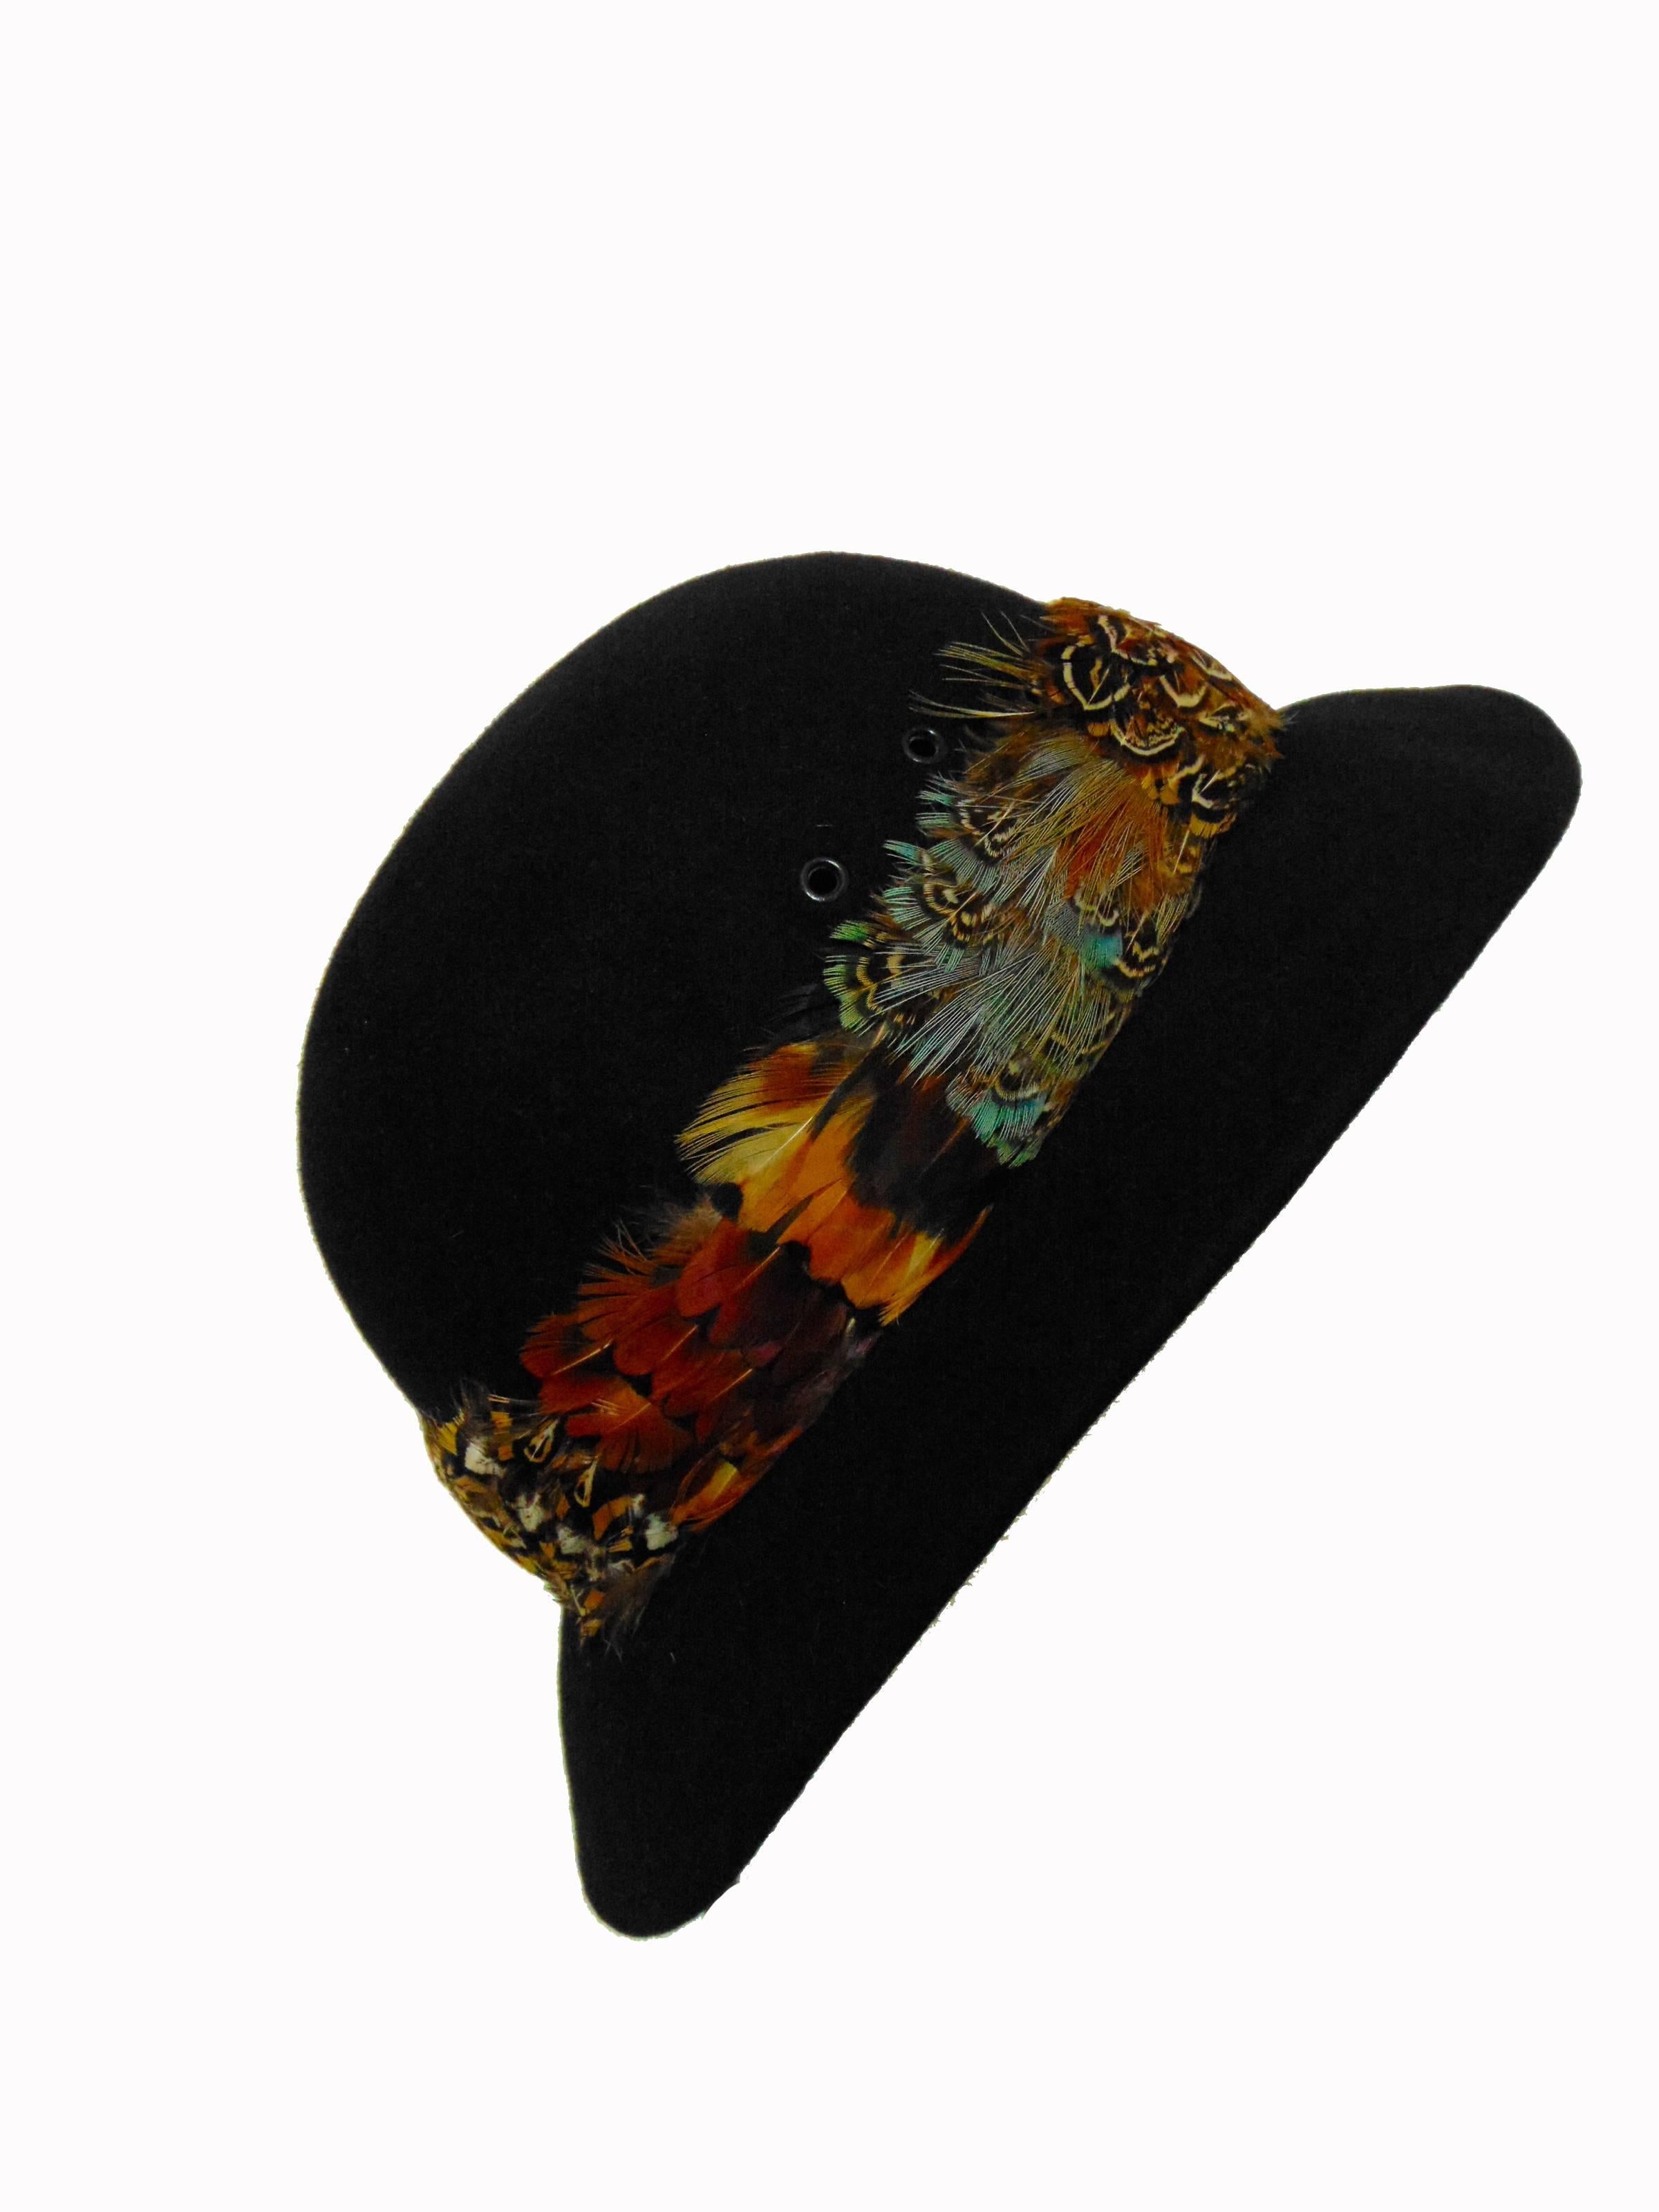 Here's a pretty wool felt hat with feather brim, made by Halston in the early 70s.  In excellent preowned condition with minimal signs of prior wear.  No size tag, but it measures appx 21 7/8 inches around, which is the equivalent of a modern size